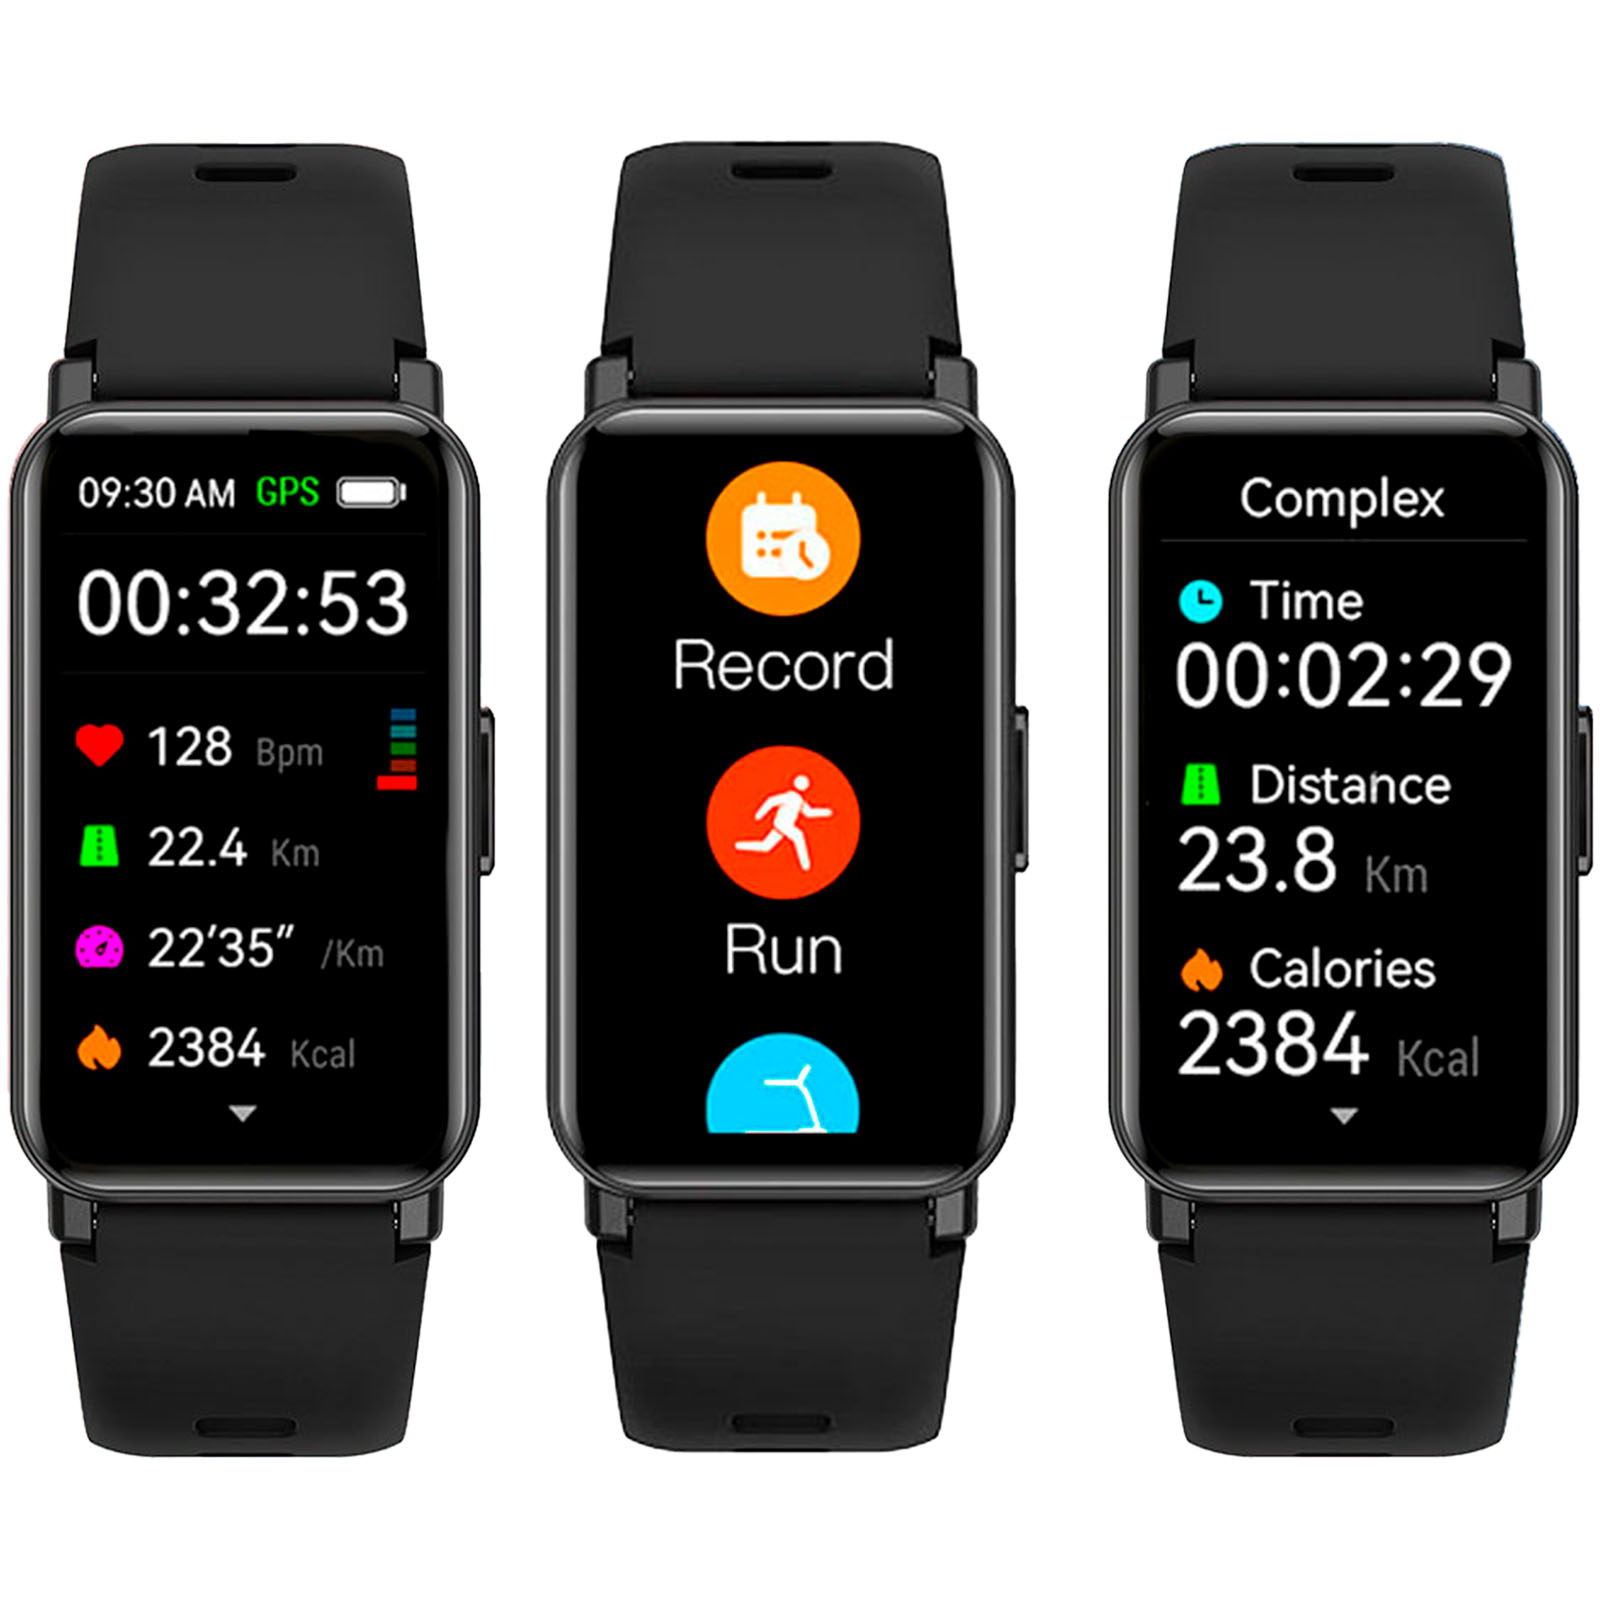 Advertising Smartwatches - Prixton AT806 multisport smartband with GPS - 4